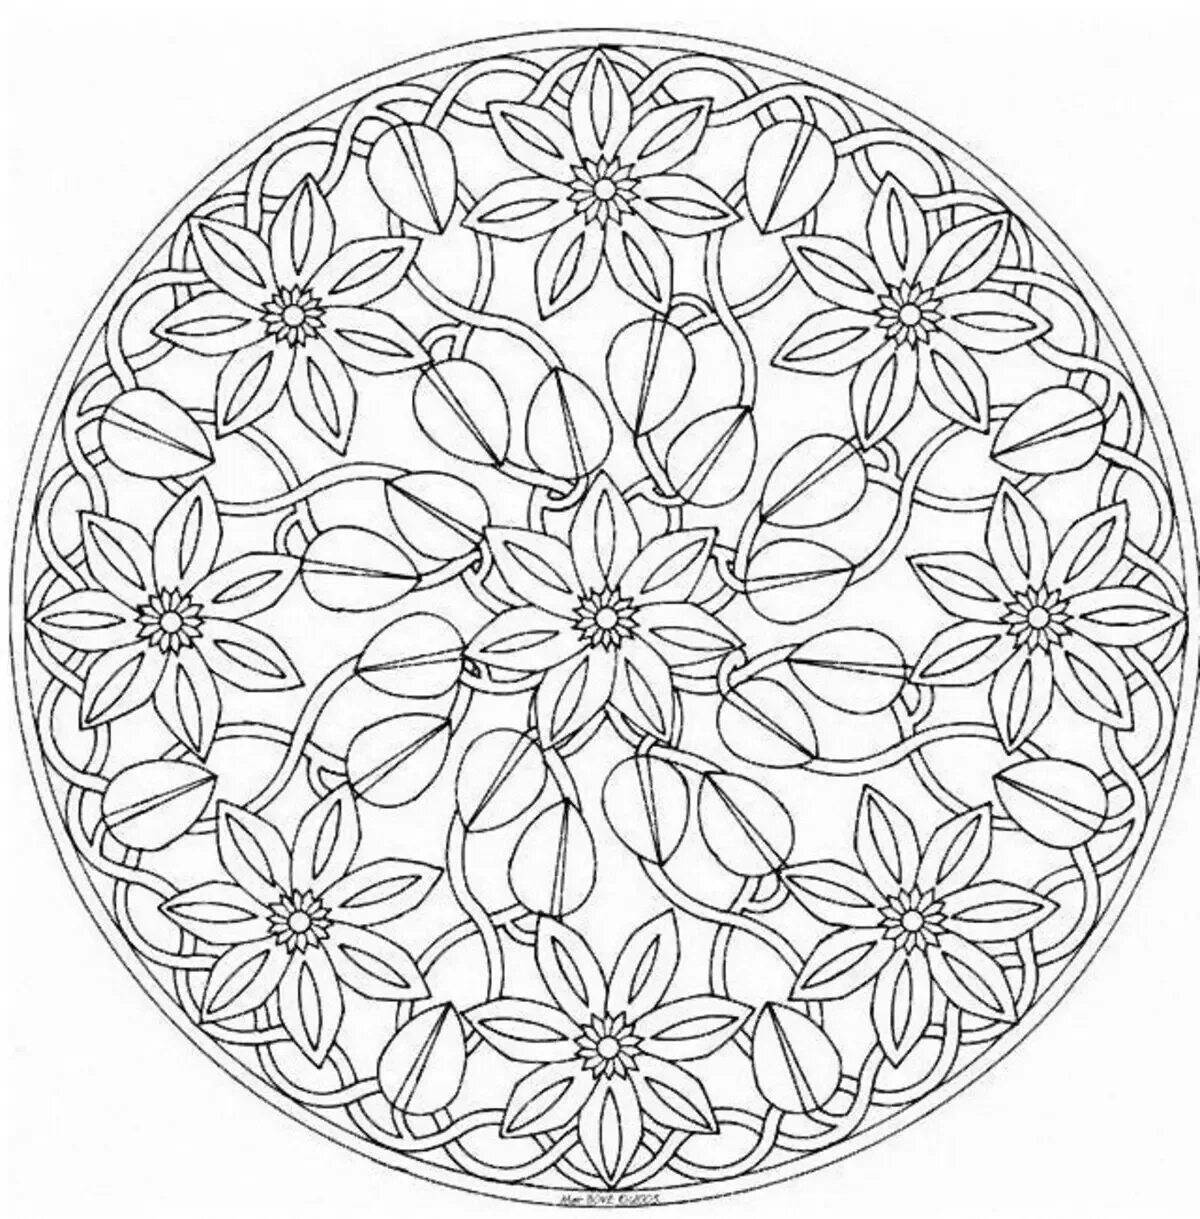 Beautiful anti-stress mandala coloring pages for adults en